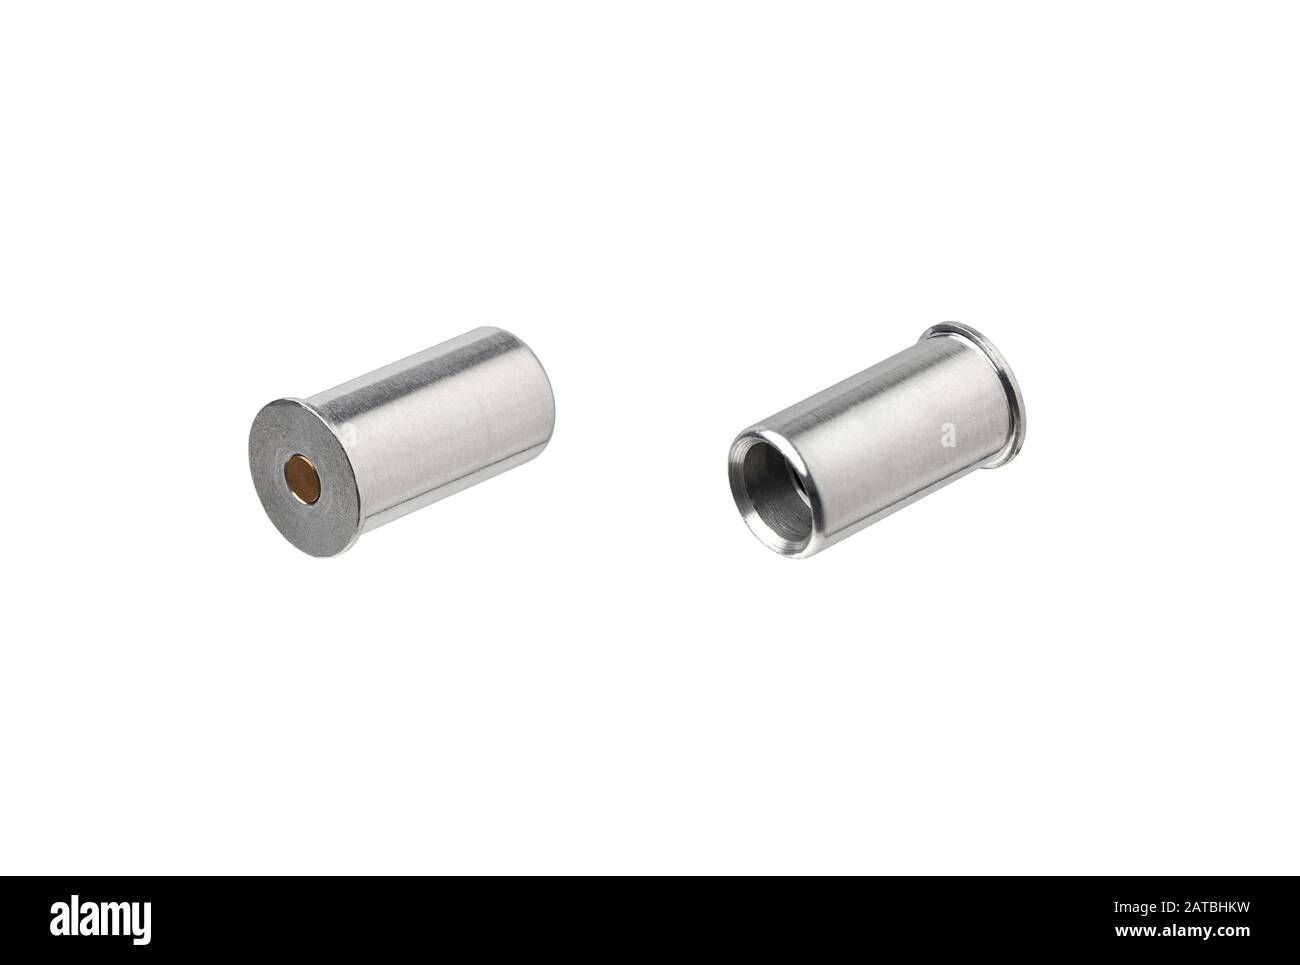 False ammo for idle double-barreled shotgun shutter. Metal cylinders isolate on a white background. Stock Photo